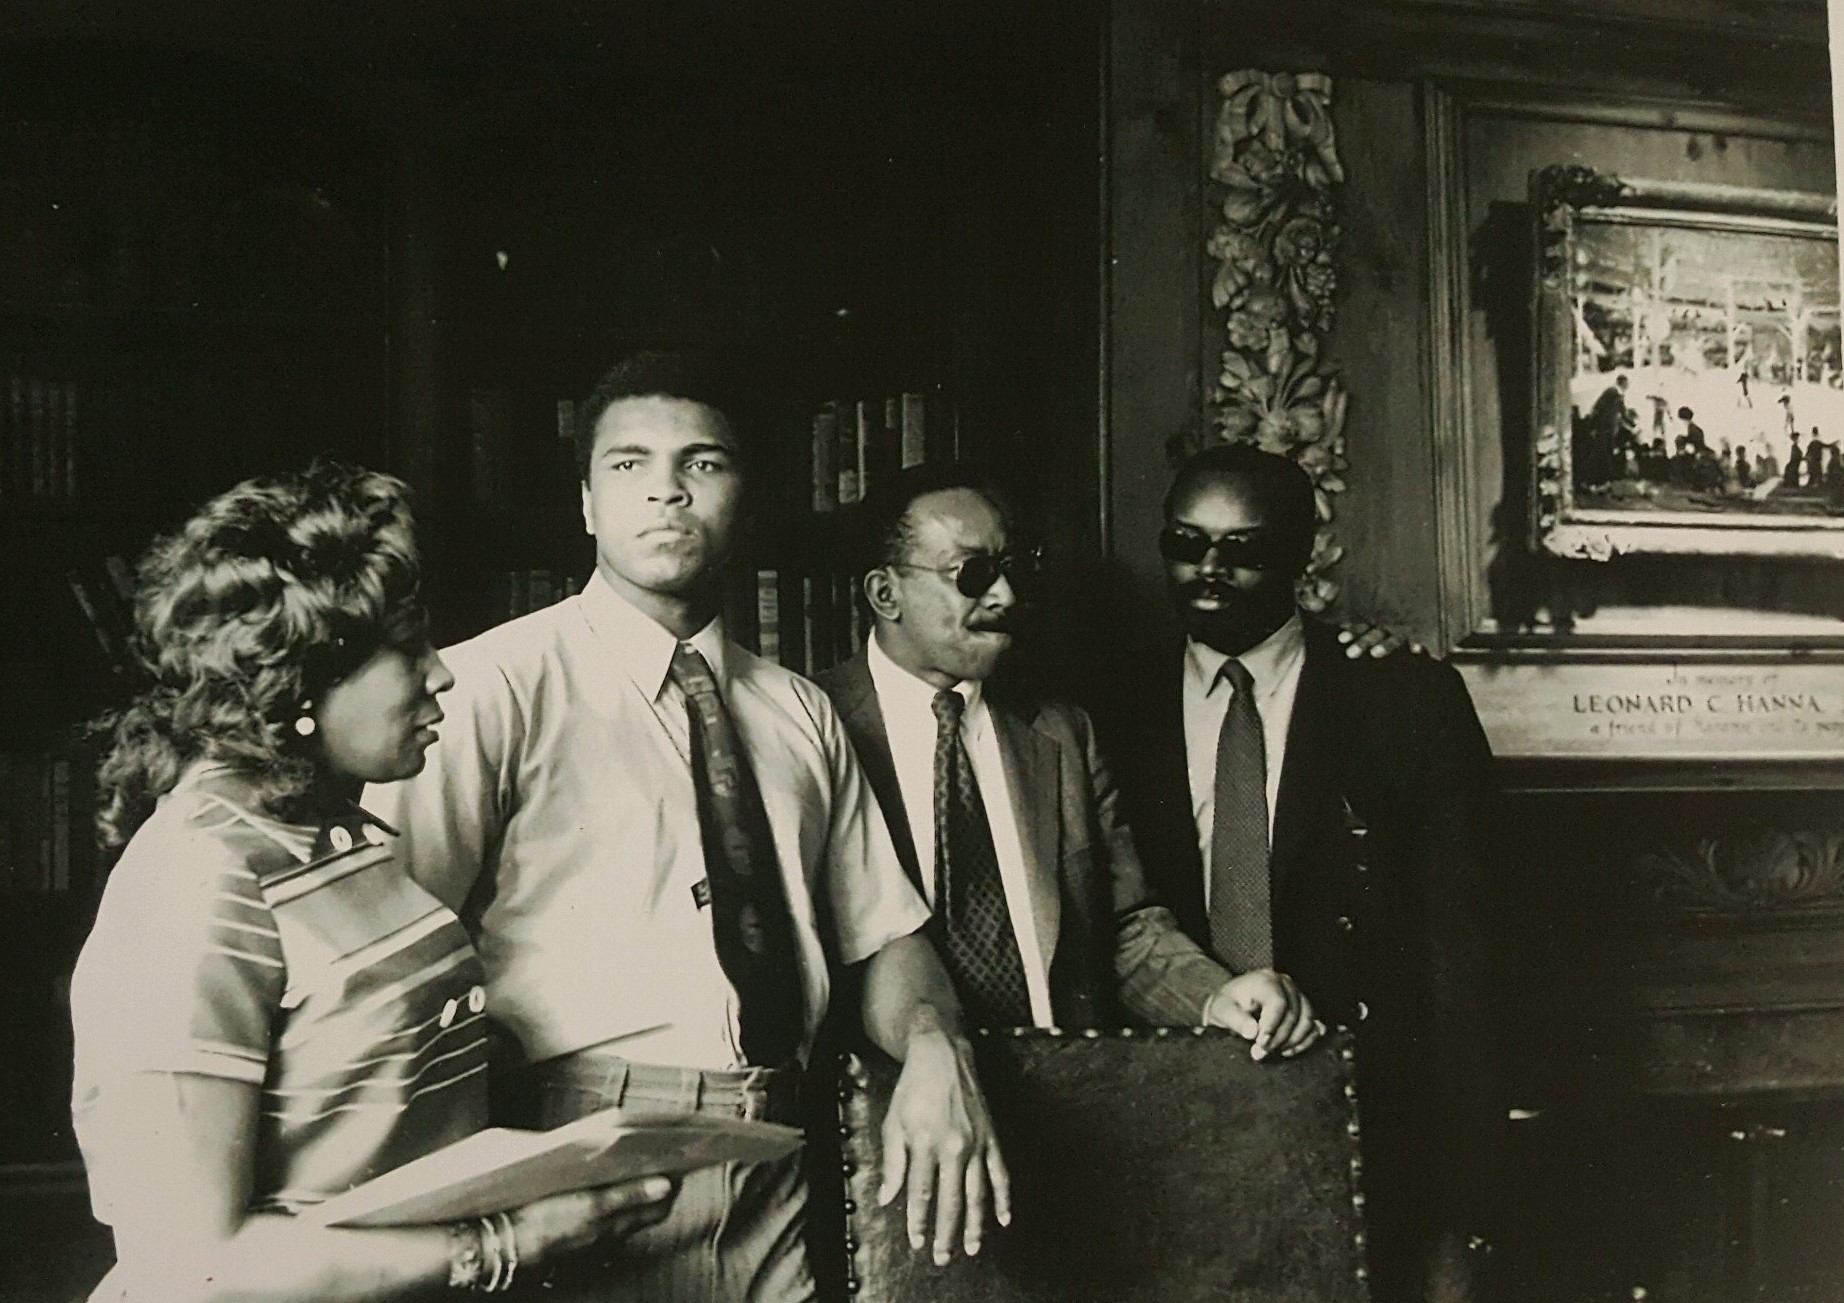 Black and white photo of Muhammad Ali visiting the Hanna Lounge as others stand nearby him